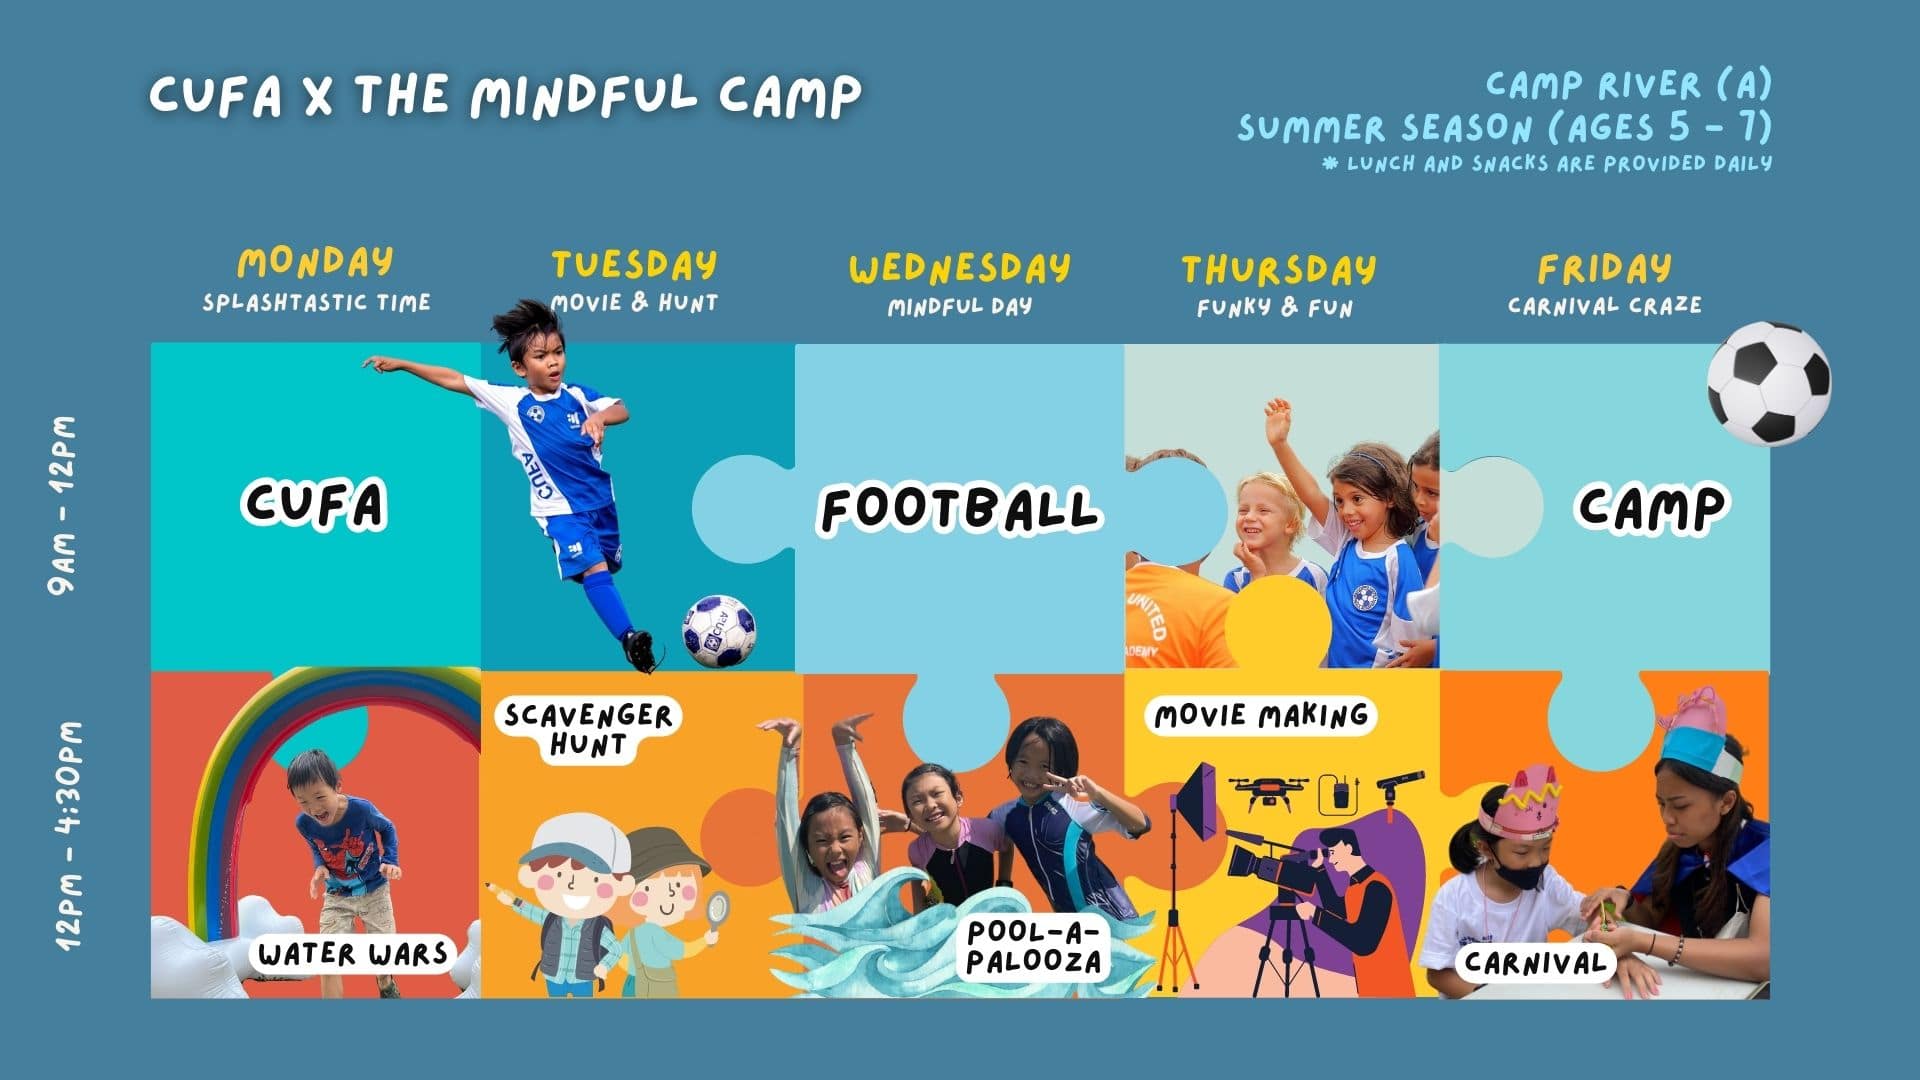 CUFA Football & The Mindful Camp River (ages 5-7)